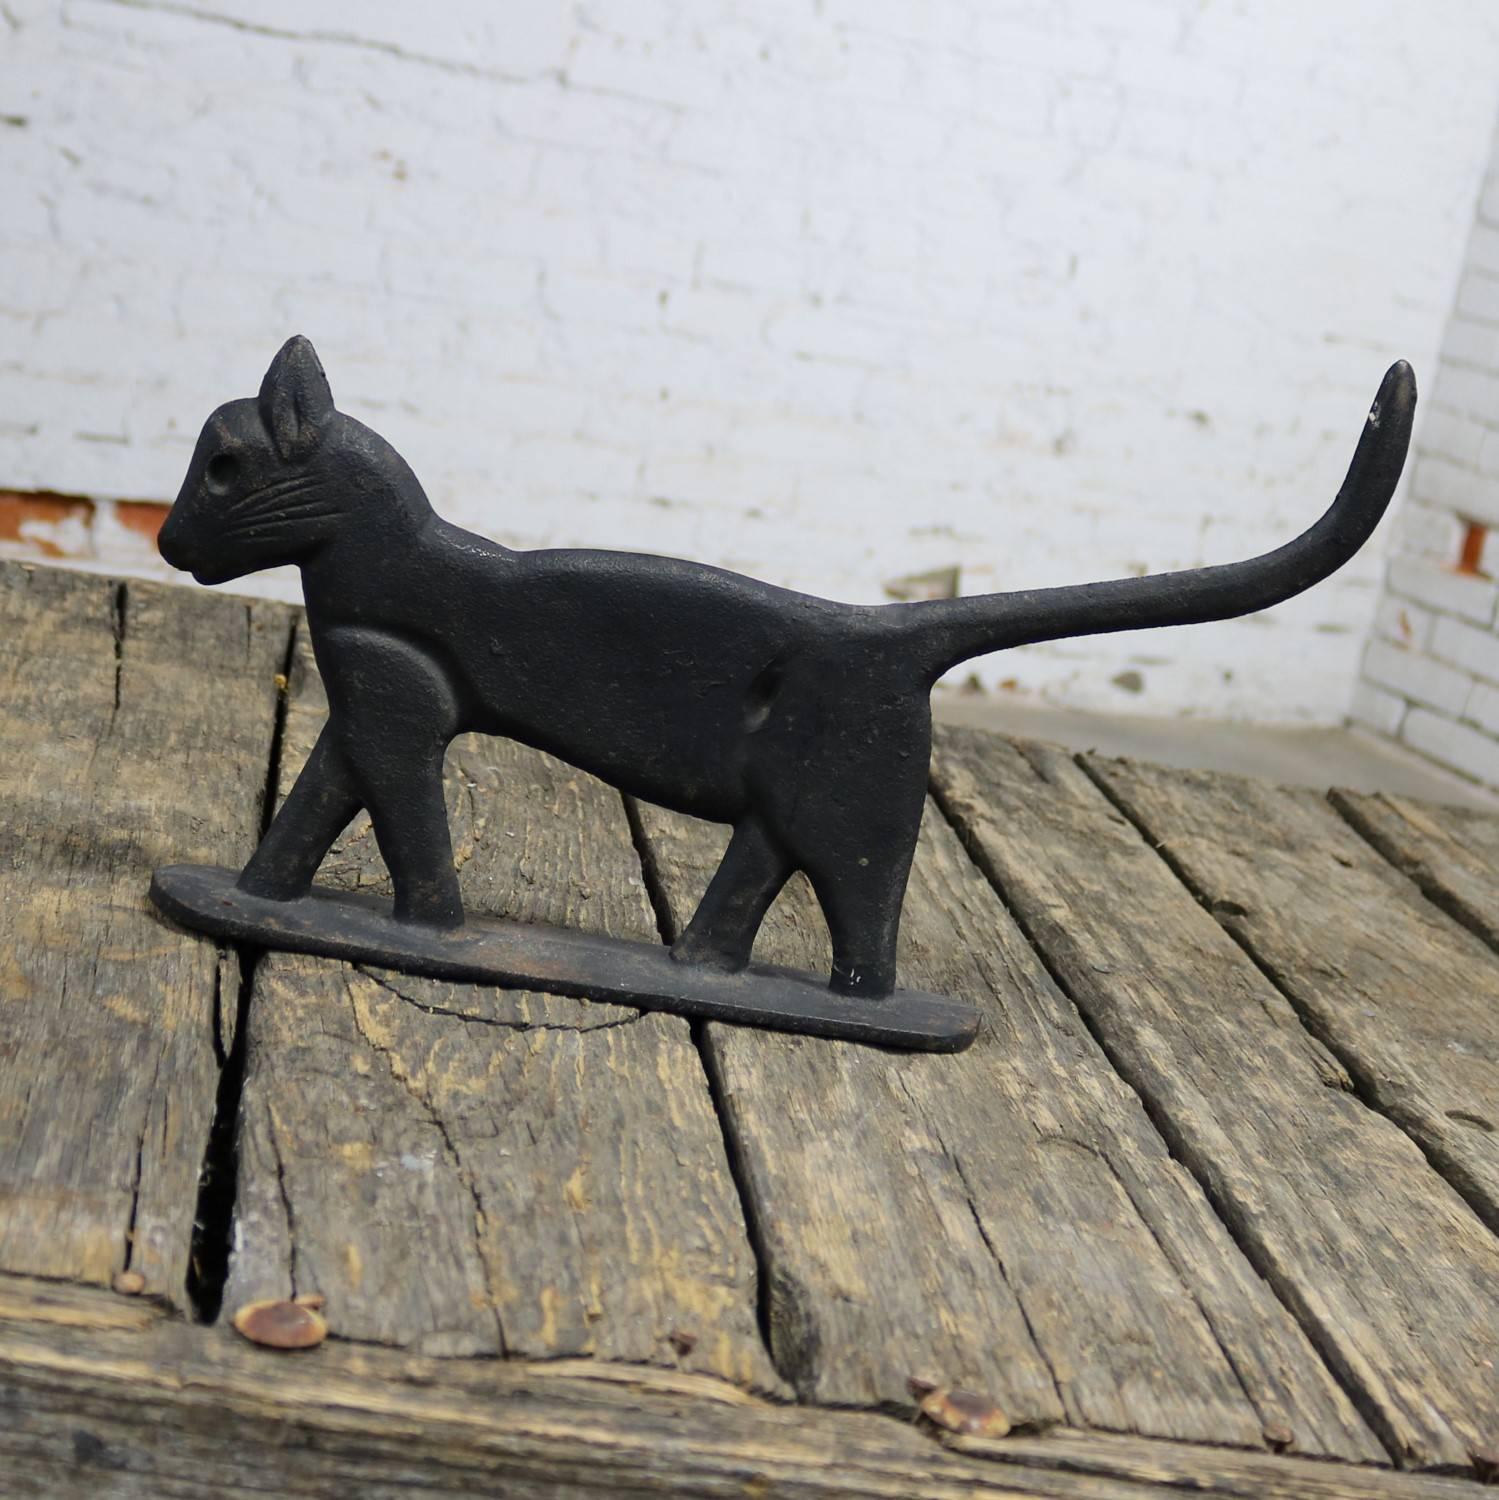 Antique and solid cast iron Folk Art black cat boot scraper or sculpture. Walking in Silhouette with tail held high and in wonderful antique condition with nice patina, circa 1900.

This guy is very proud and handsome whether you use him for his